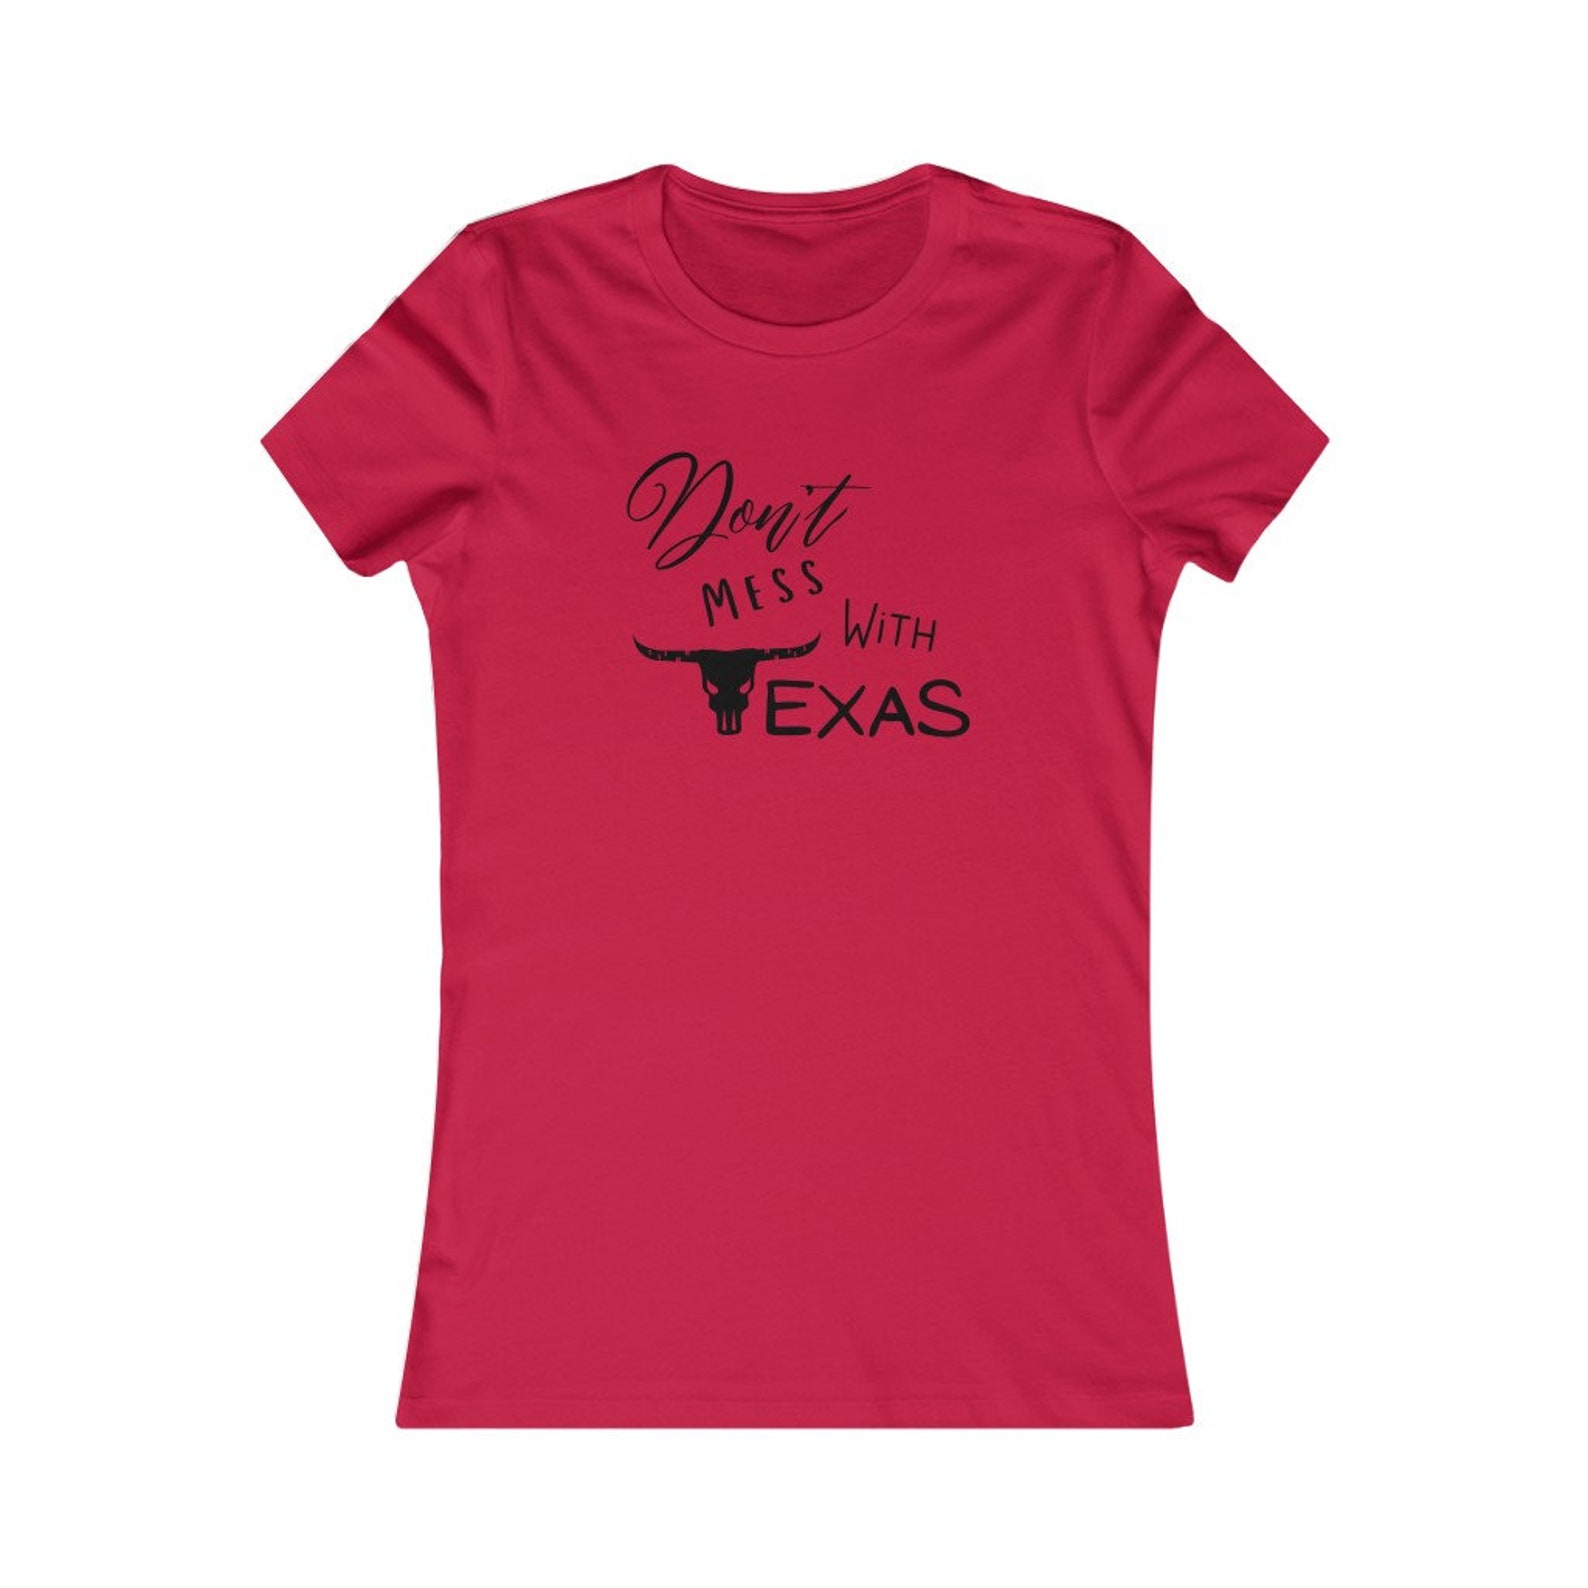 Don't Mess With Texas Women's T-Shirt | Etsy